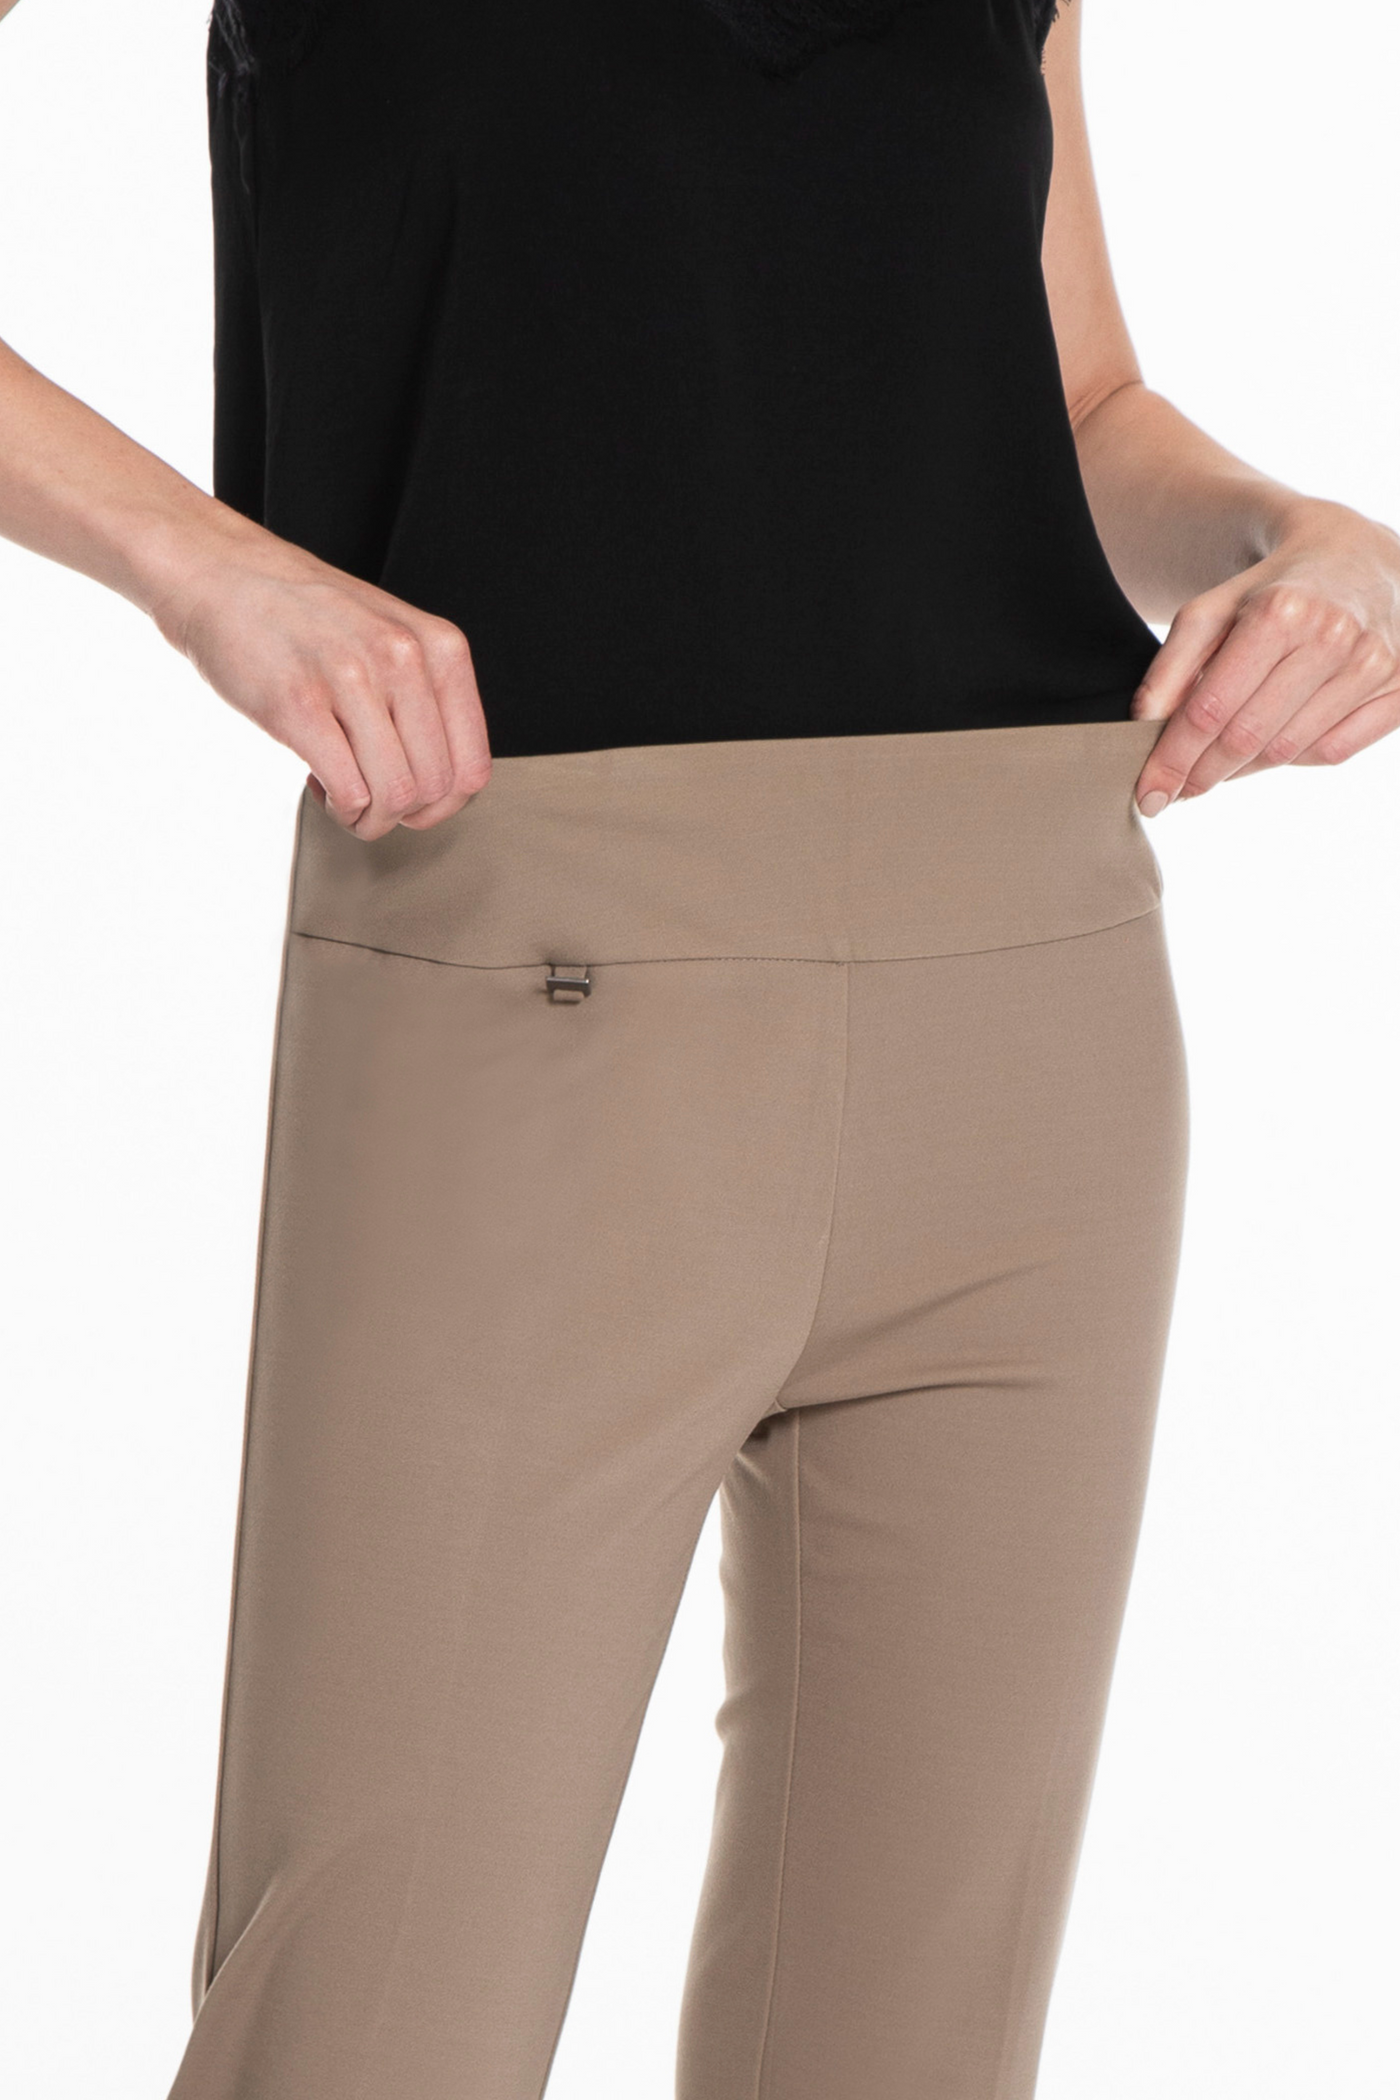 PLUS Pull-On Solid Ease-Y-Fit Knit Ankle Leg Pant - Truffle